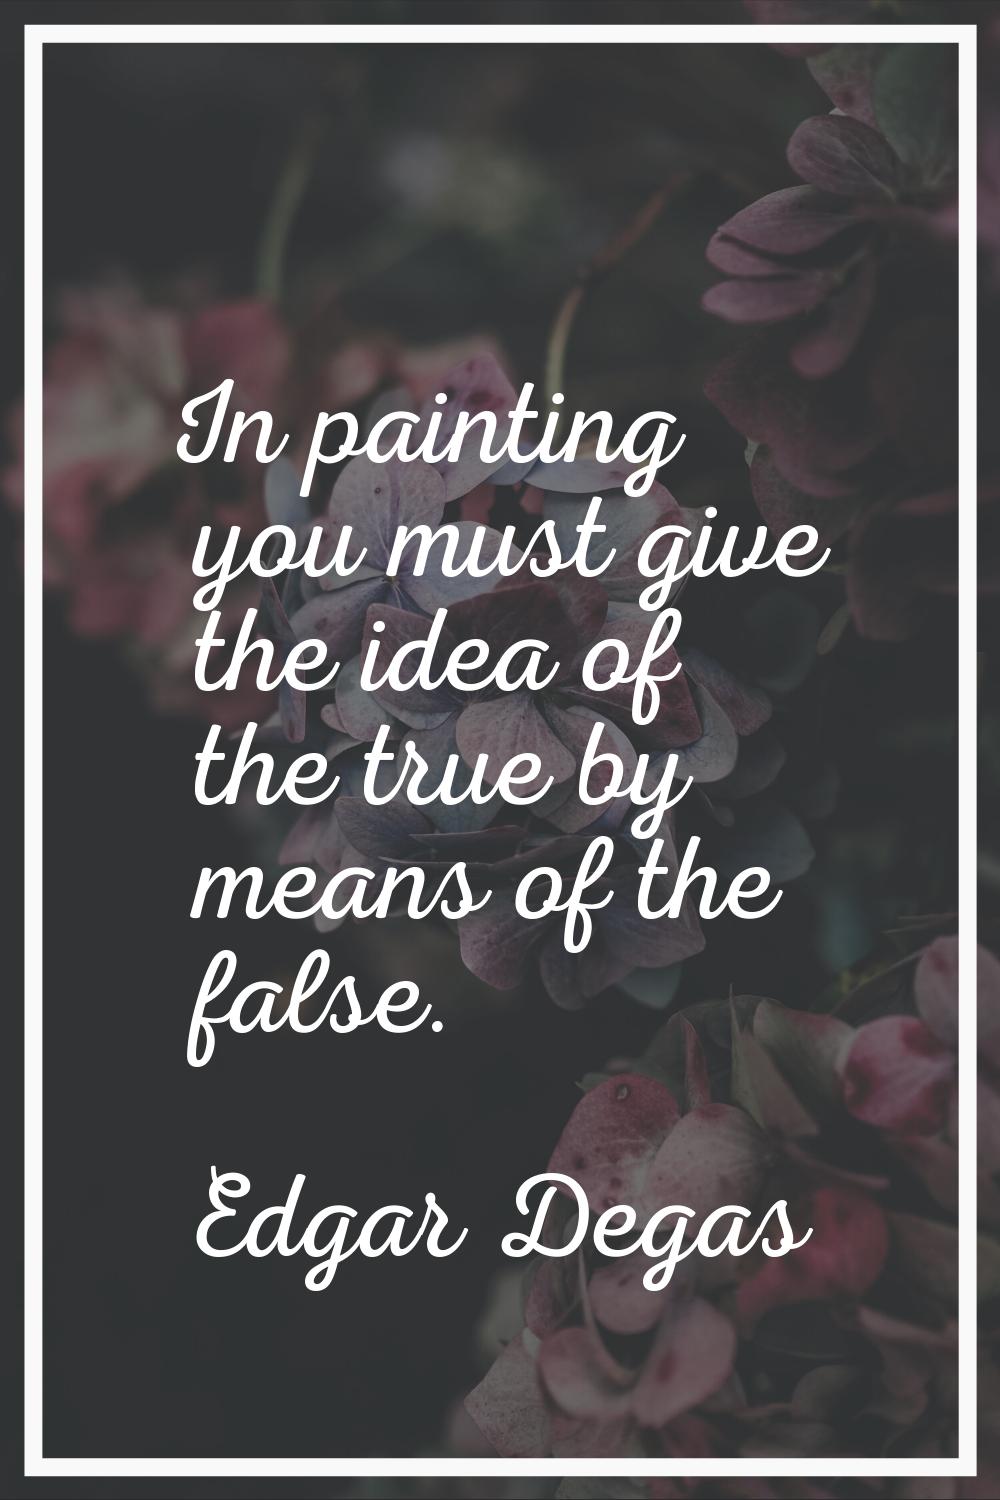 In painting you must give the idea of the true by means of the false.